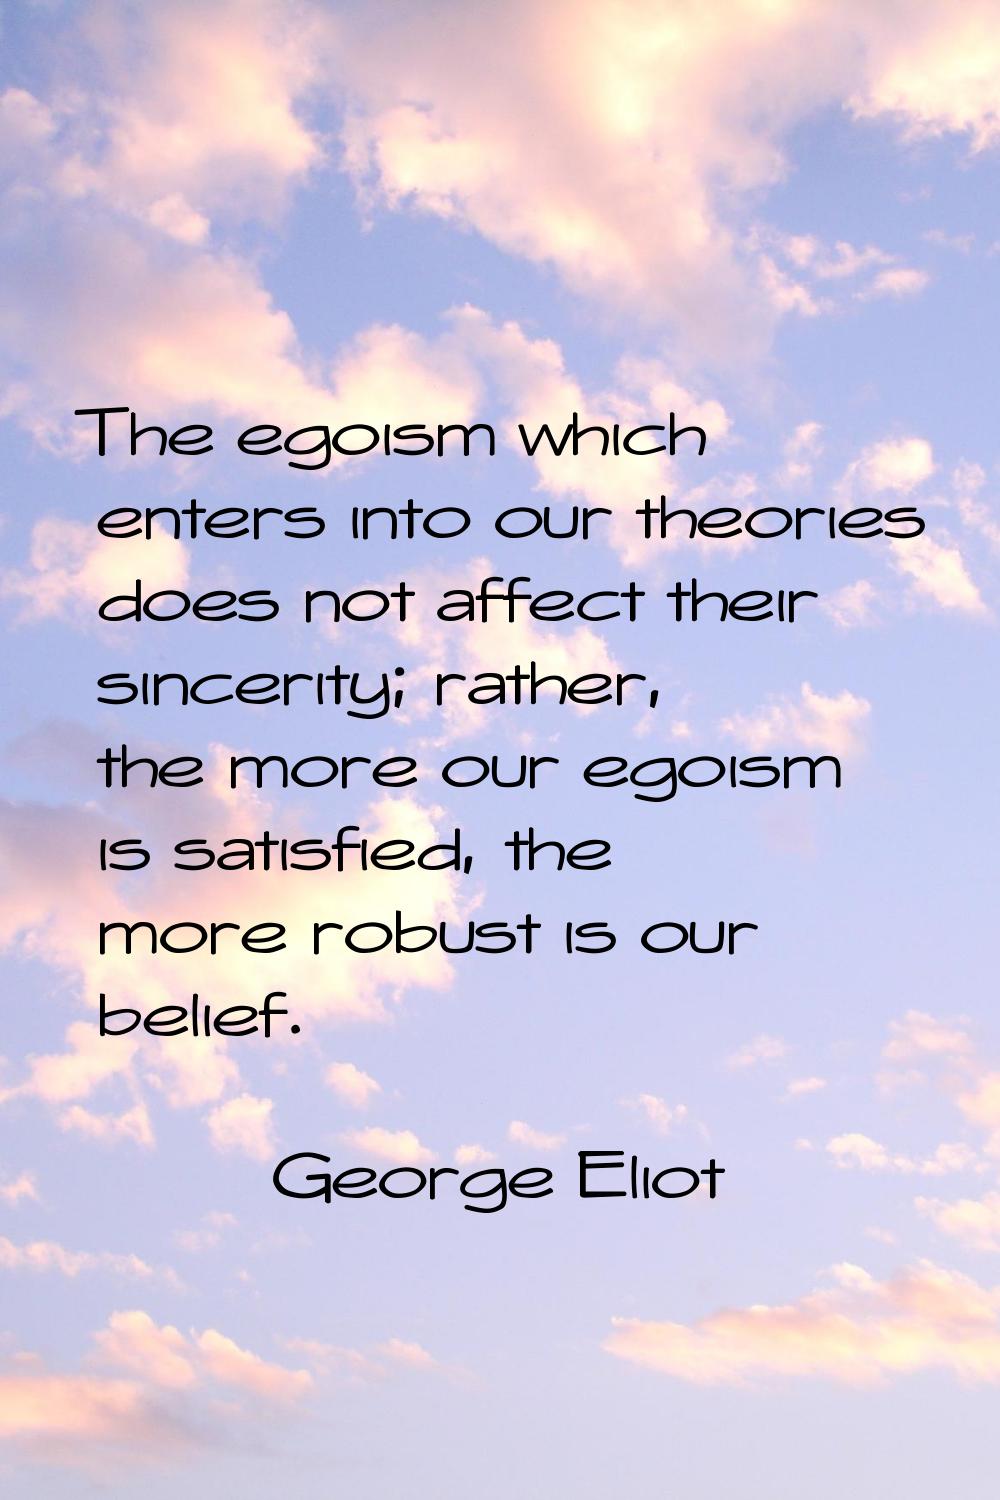 The egoism which enters into our theories does not affect their sincerity; rather, the more our ego